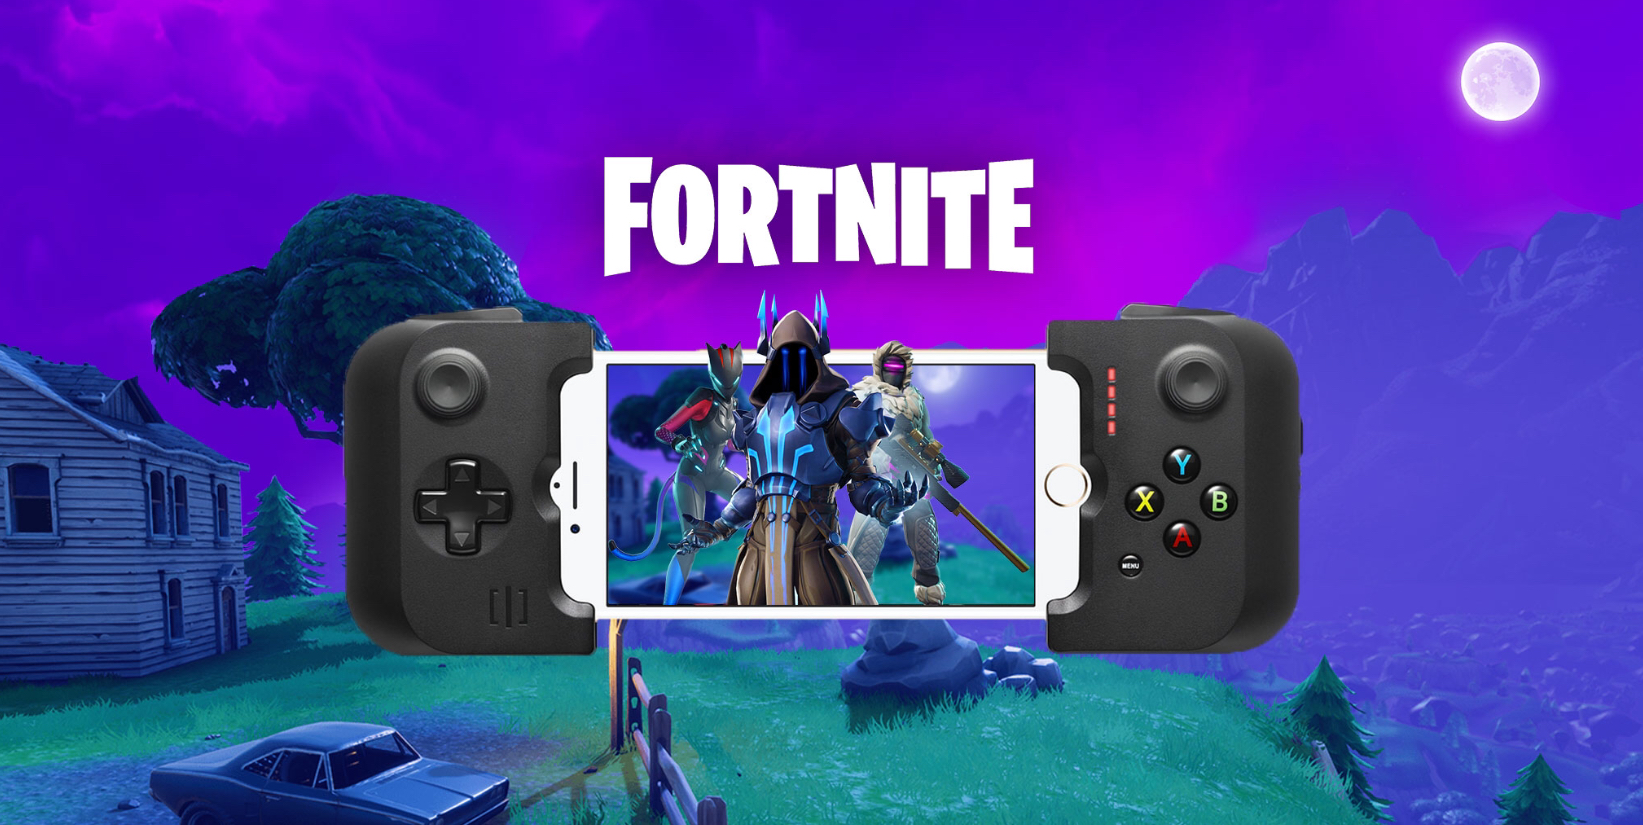 With ‘Fortnite’ Adding Controller Support, We Look at How Apple Could Take Things a Little Seriously with It